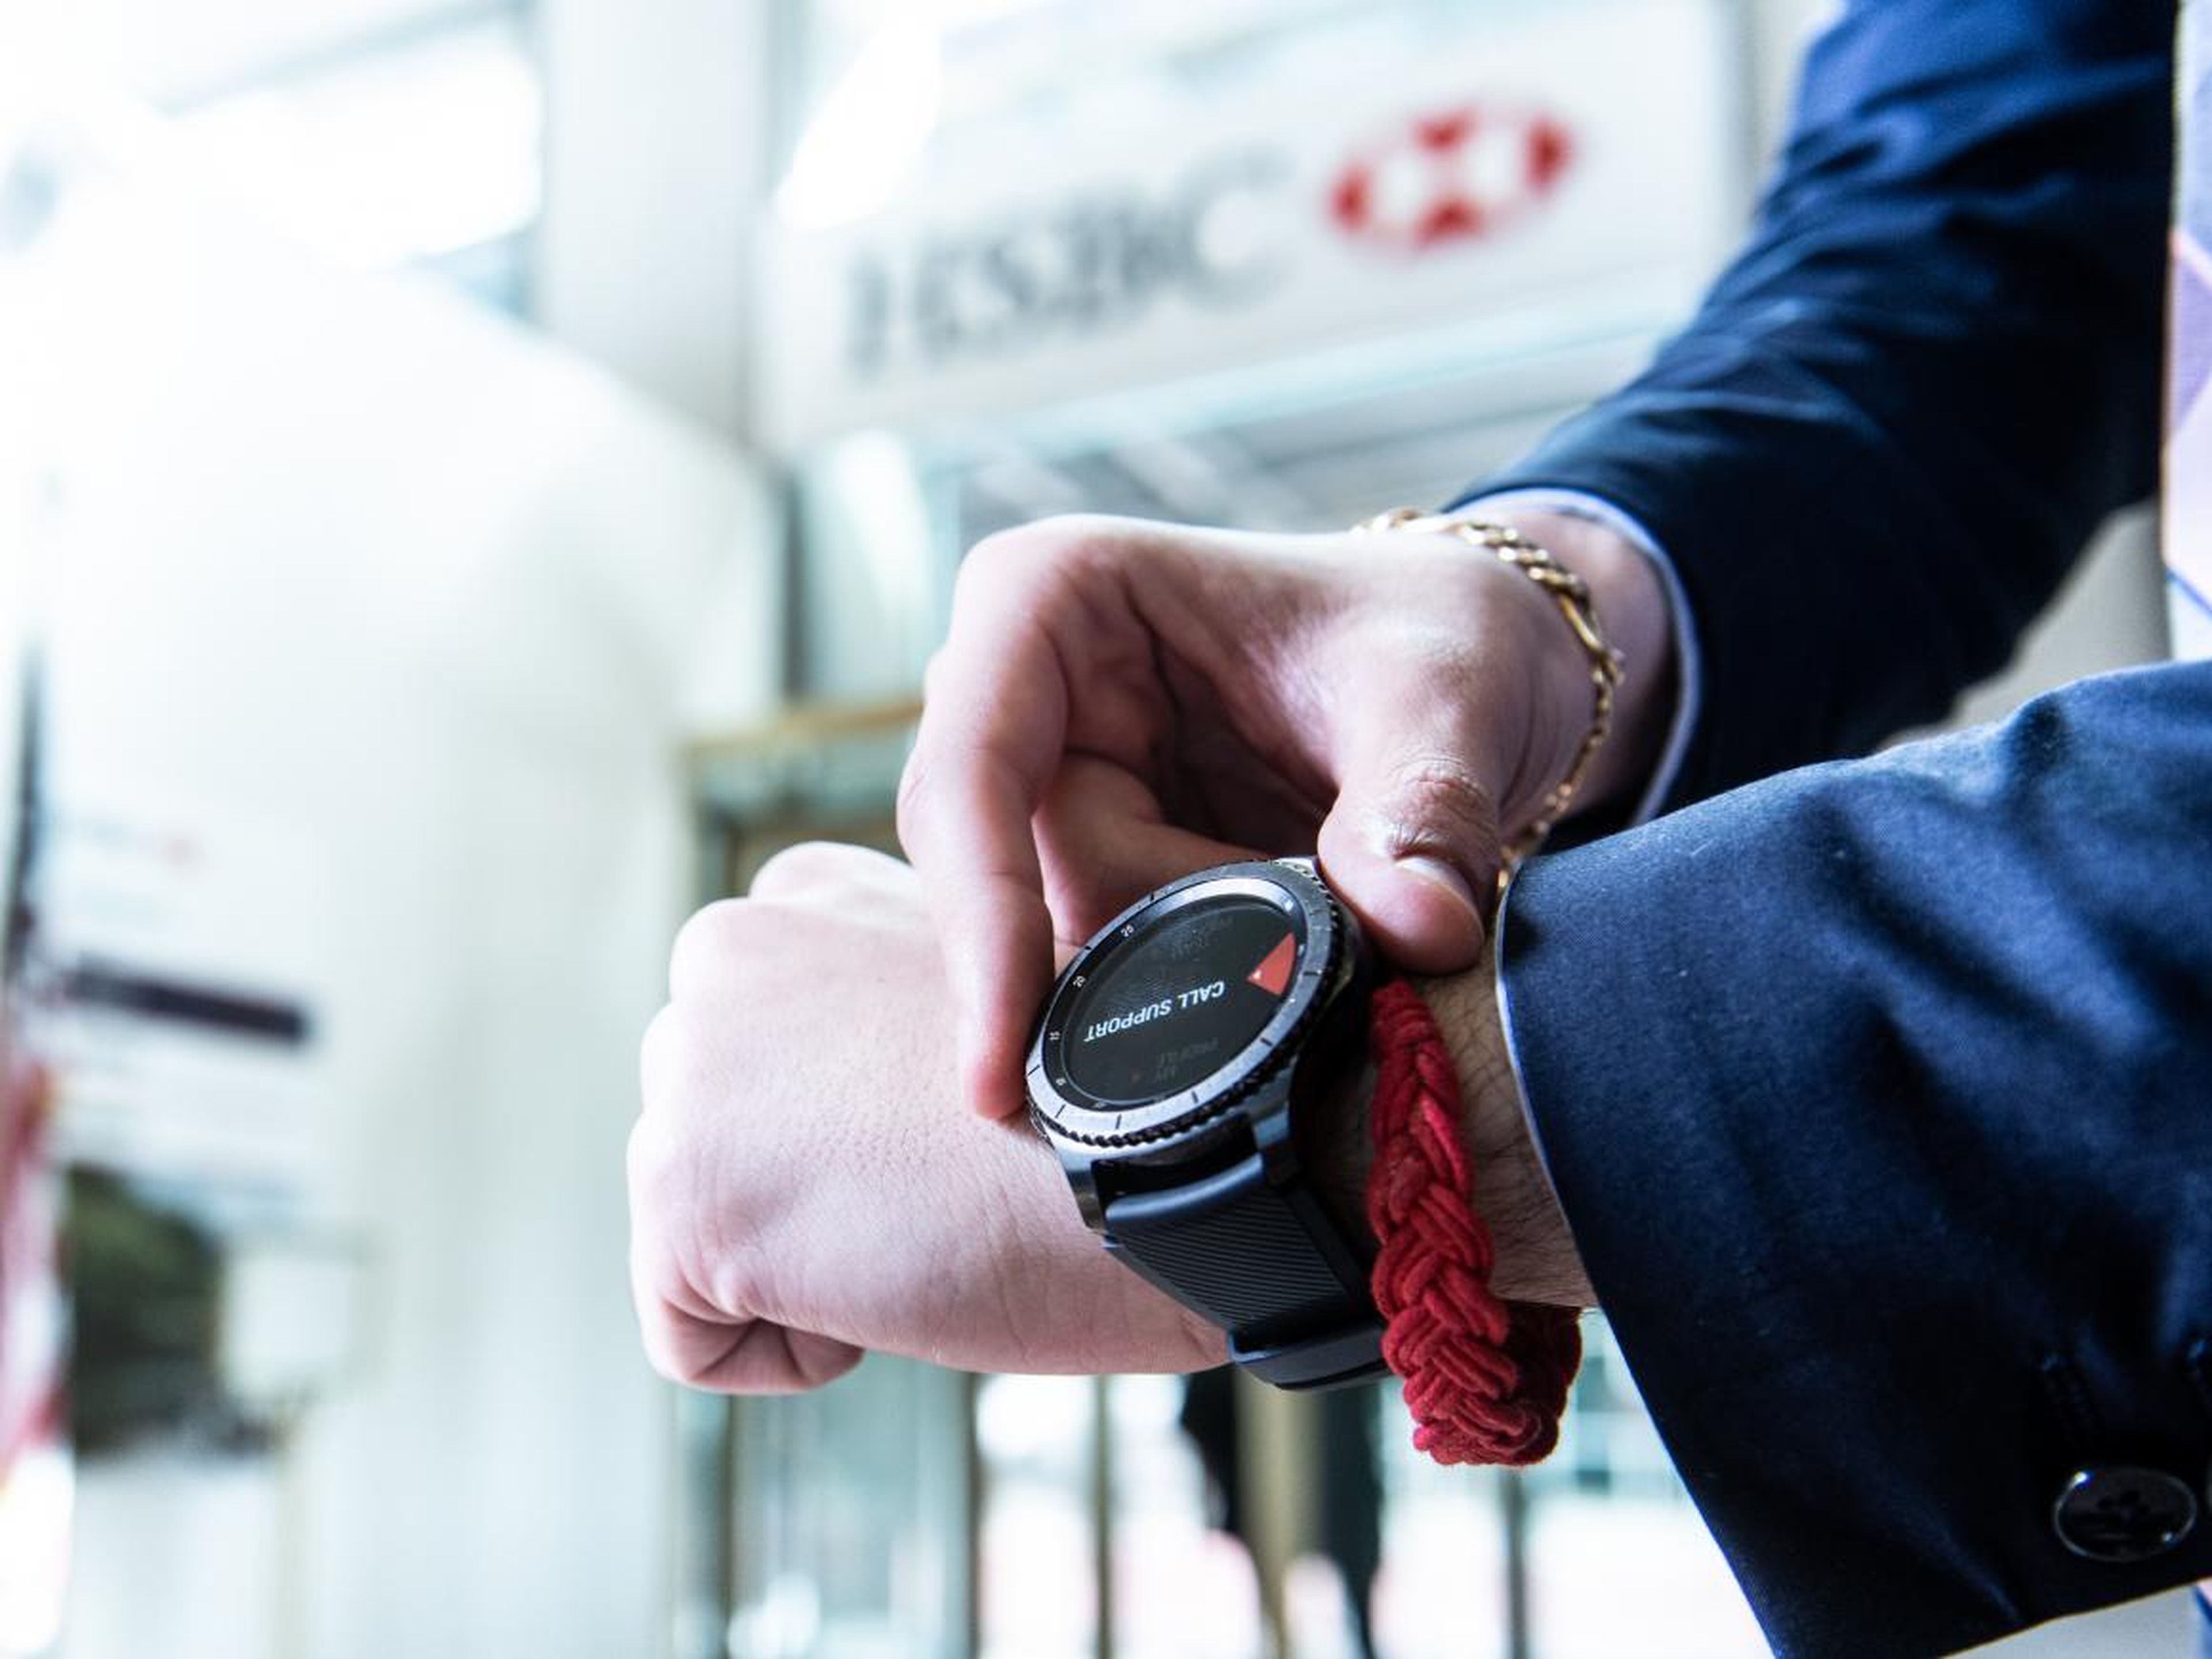 HSBC and Samsung have partnered on a program to bring wearable technology into bank branches.